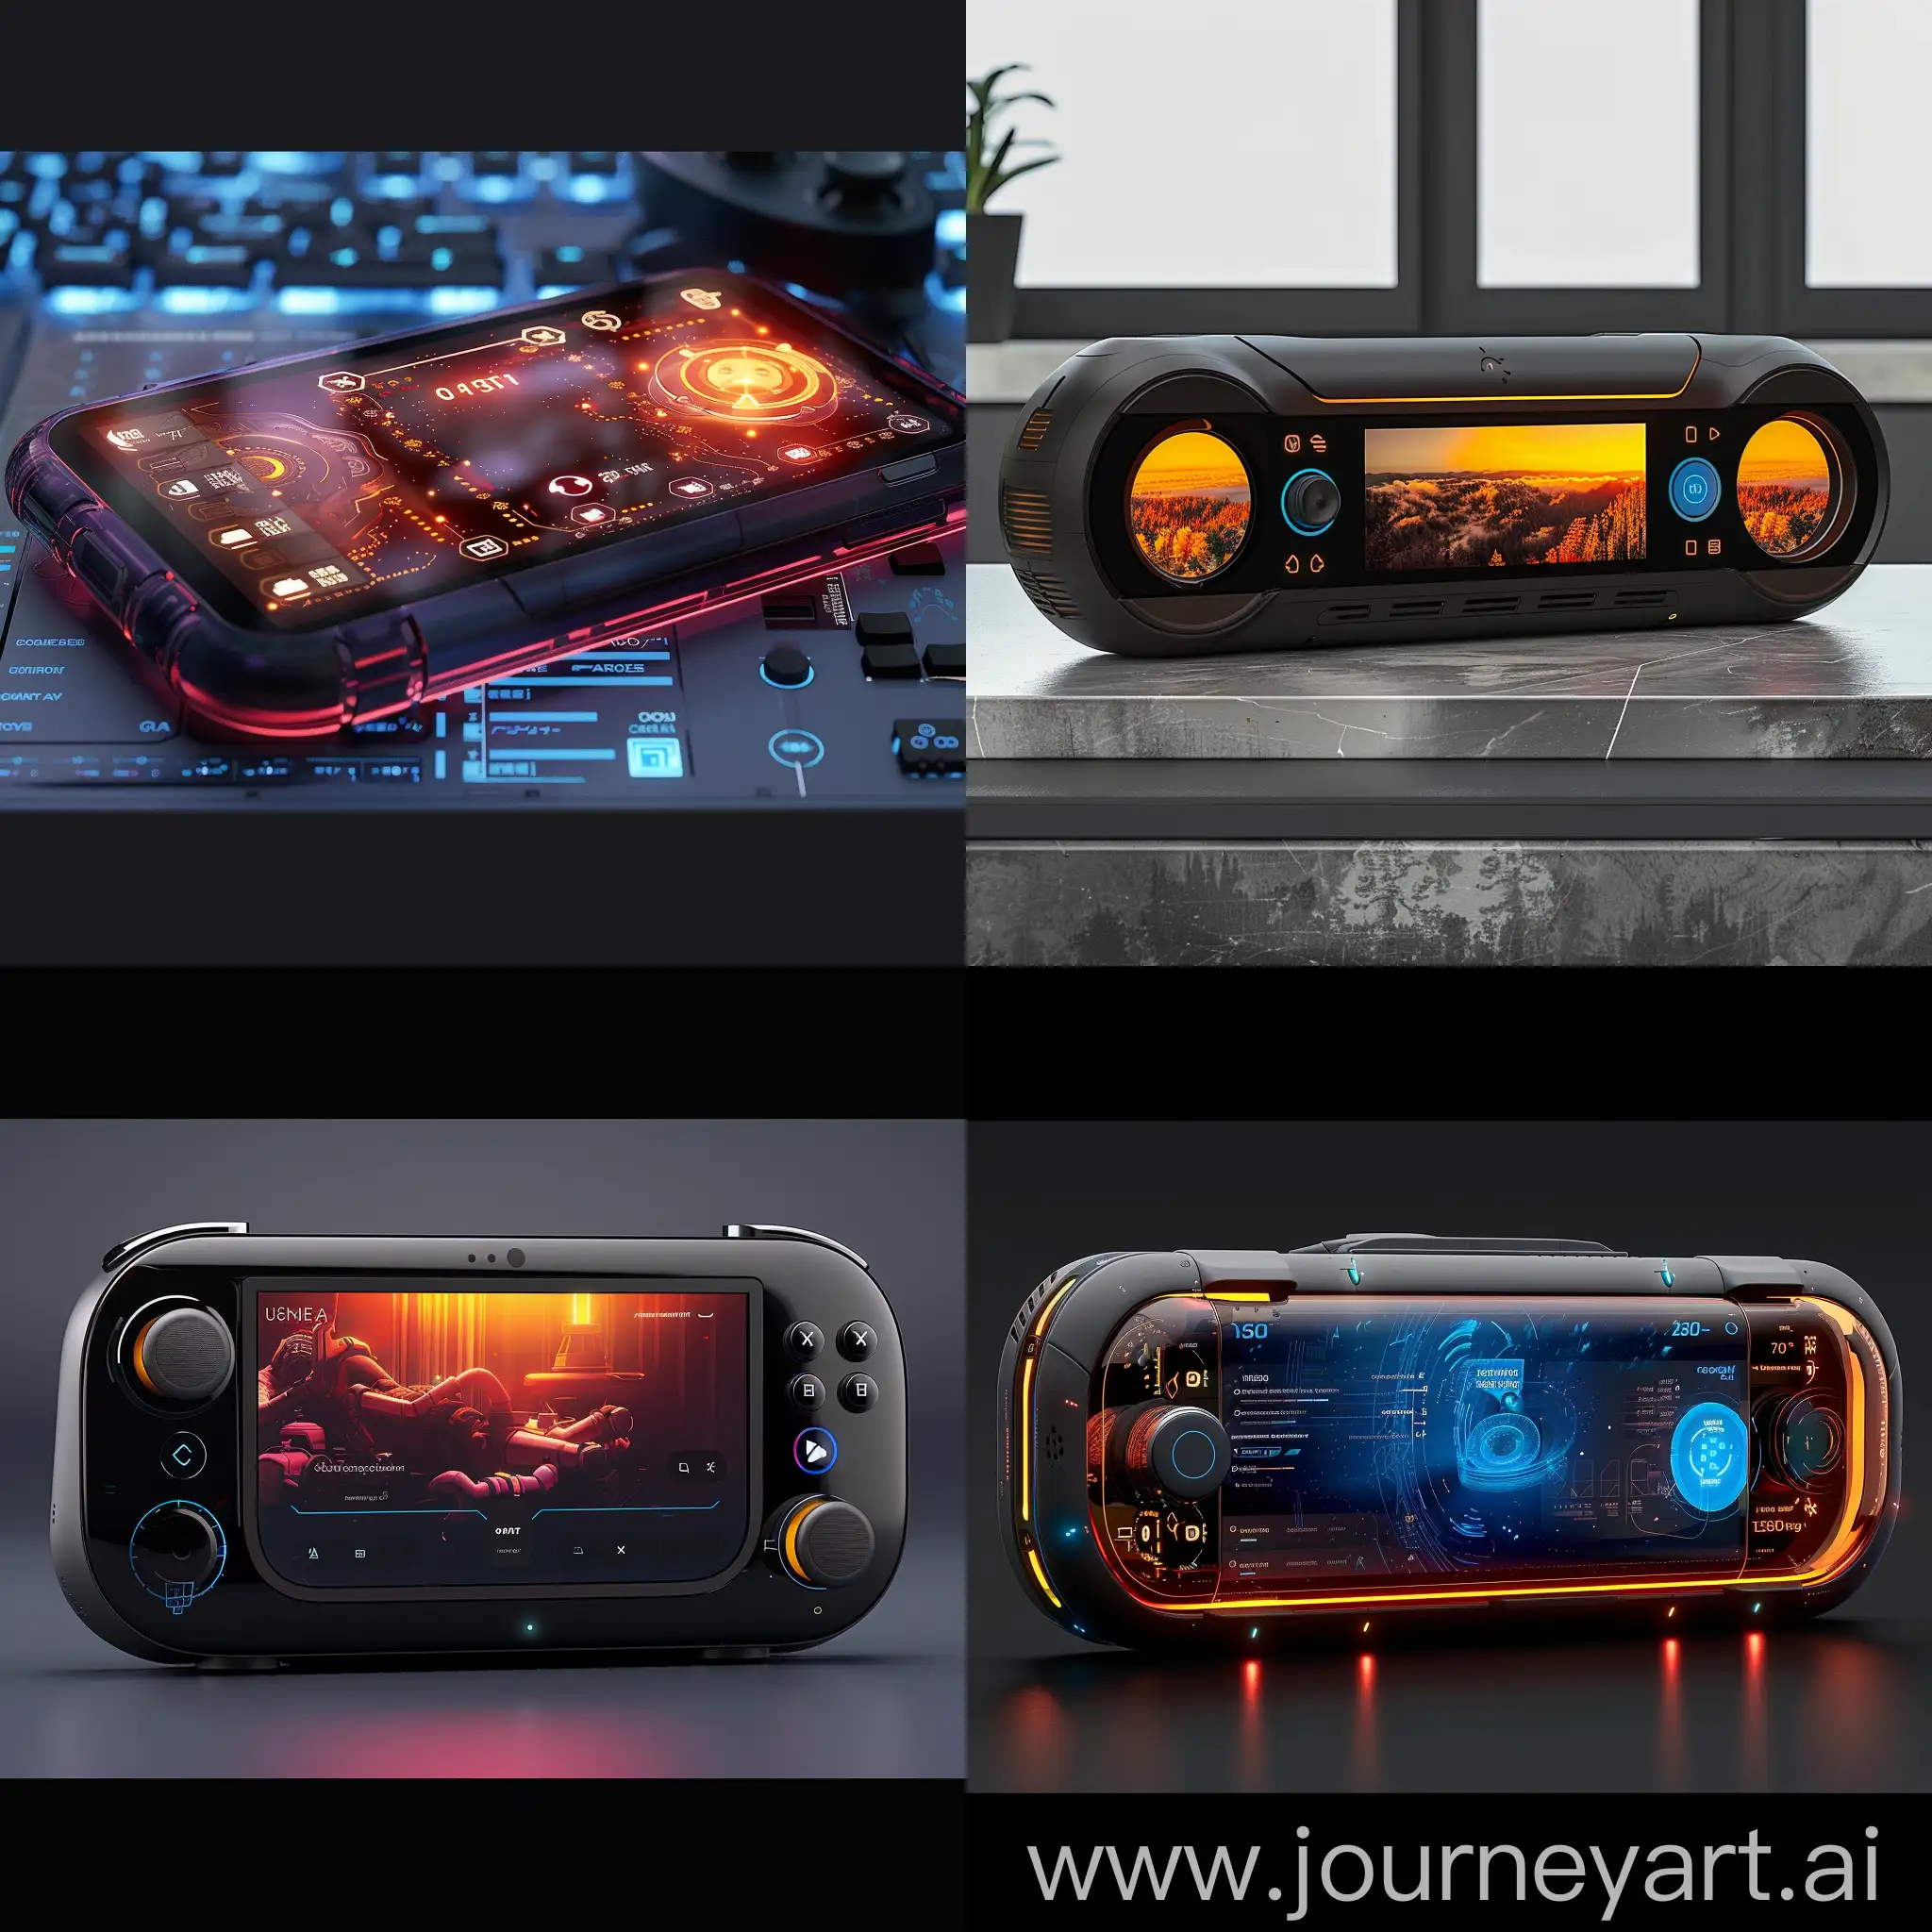 Futuristic-Steam-Deck-OLED-with-Energyefficient-Display-and-Ecofriendly-Features